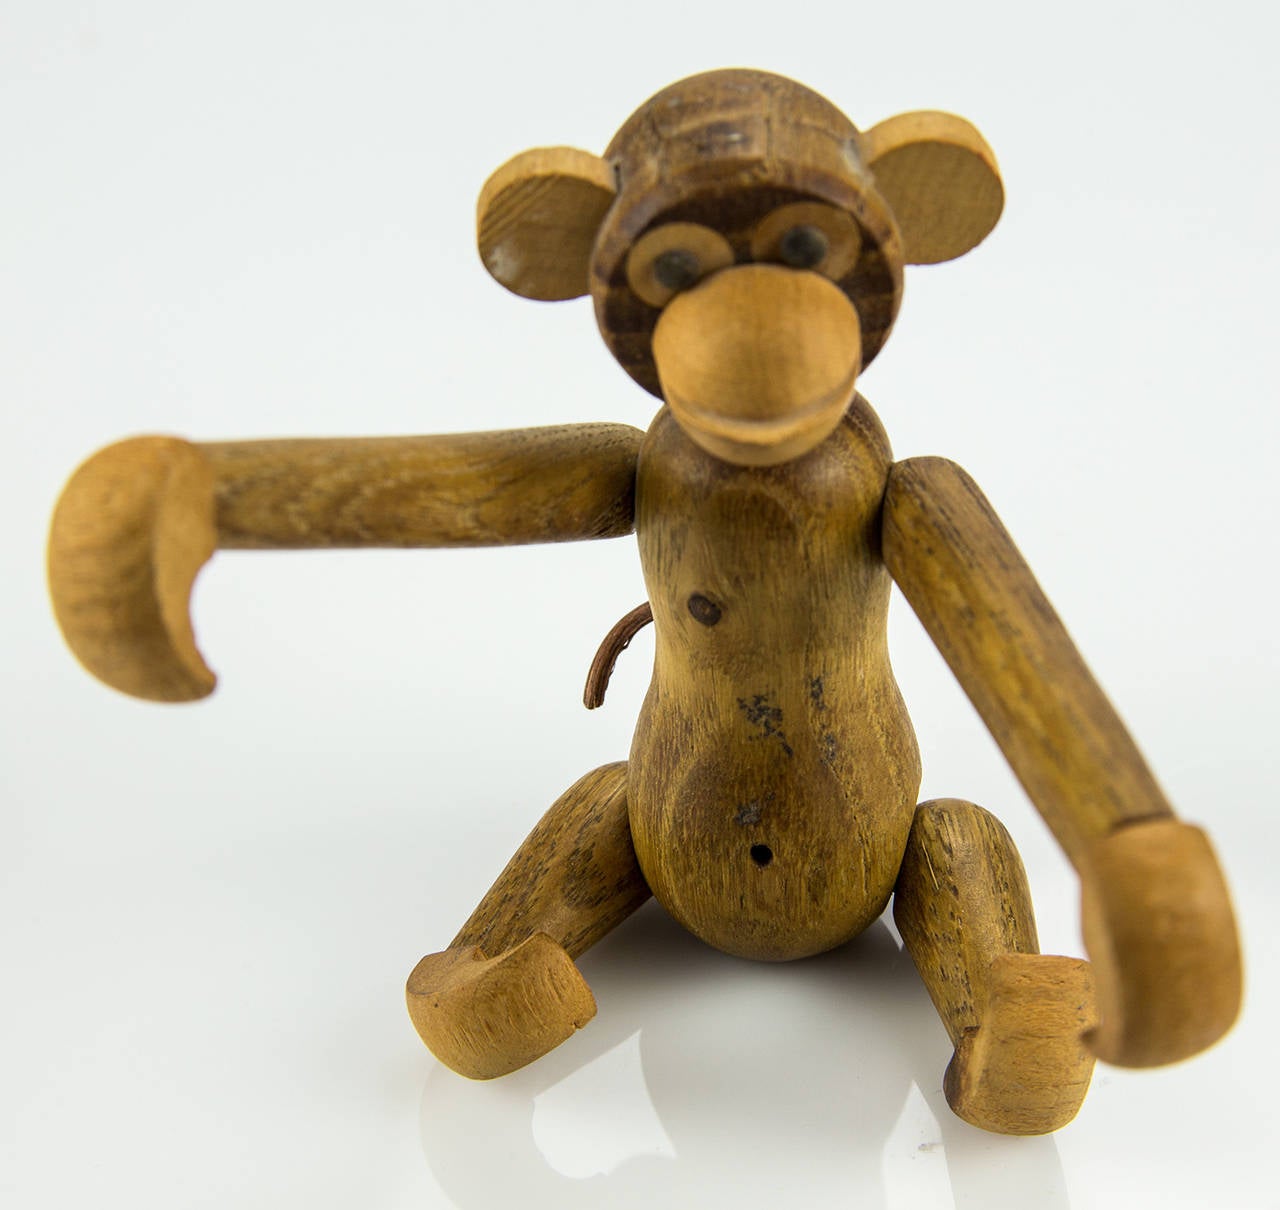 Enchanting and expressive Danish children’s toy is of a fully articulated long armed monkey, beautifully crafted in teak and limba, measuring approximately: 4” high x 4” wide x 3.5” deep, circa 1960s. With life like personality and attitude to